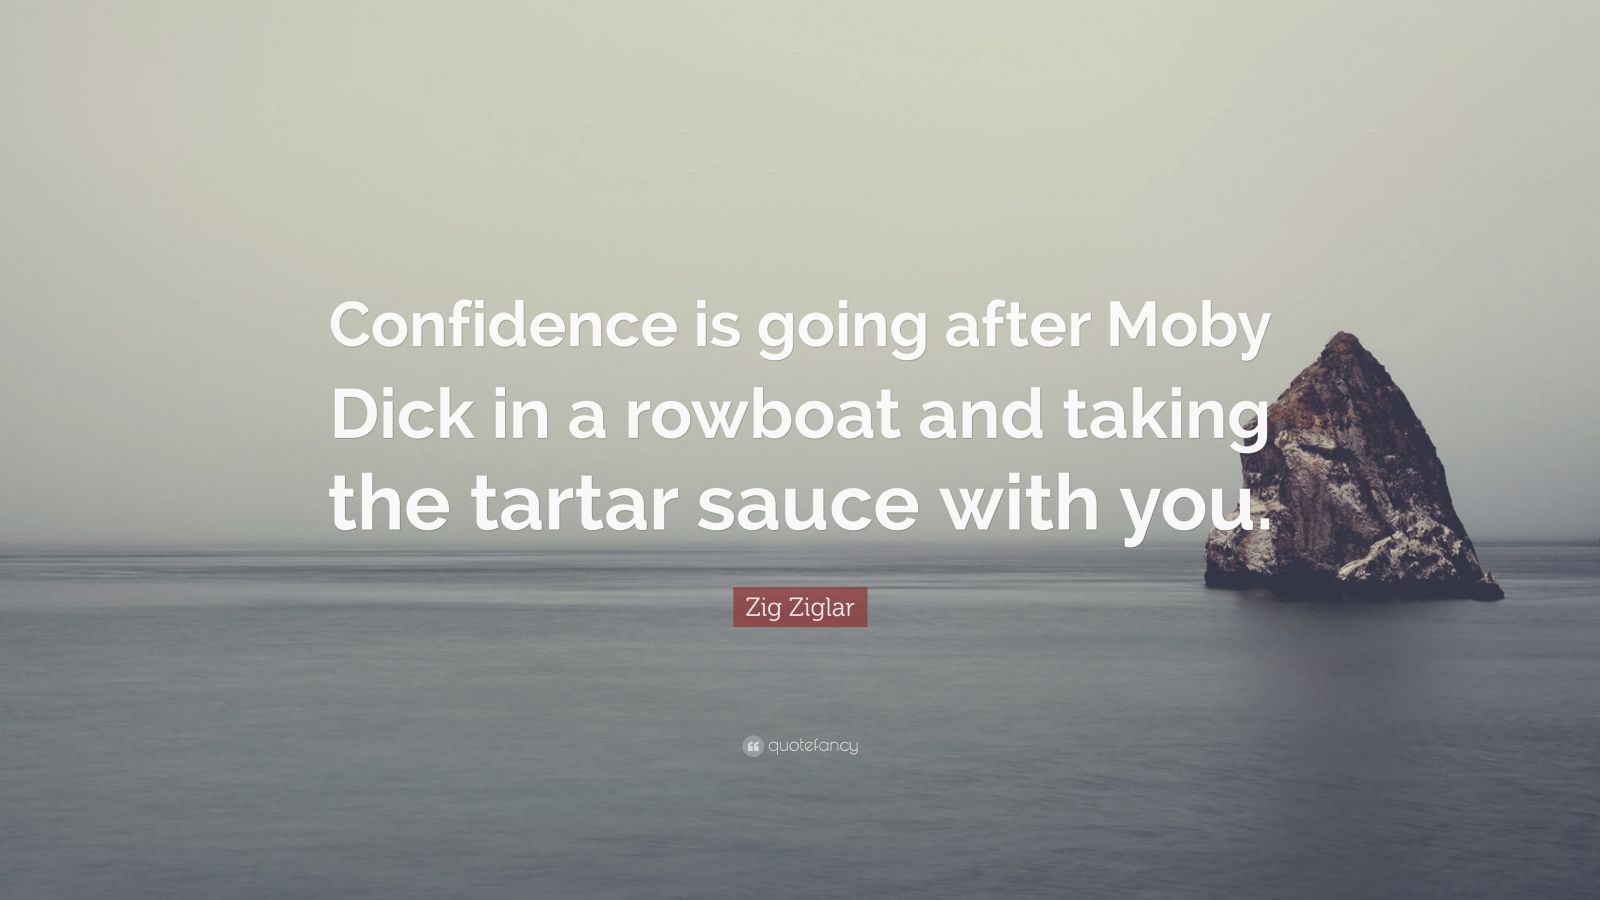 zig ziglar quote: “confidence is going after moby dick in